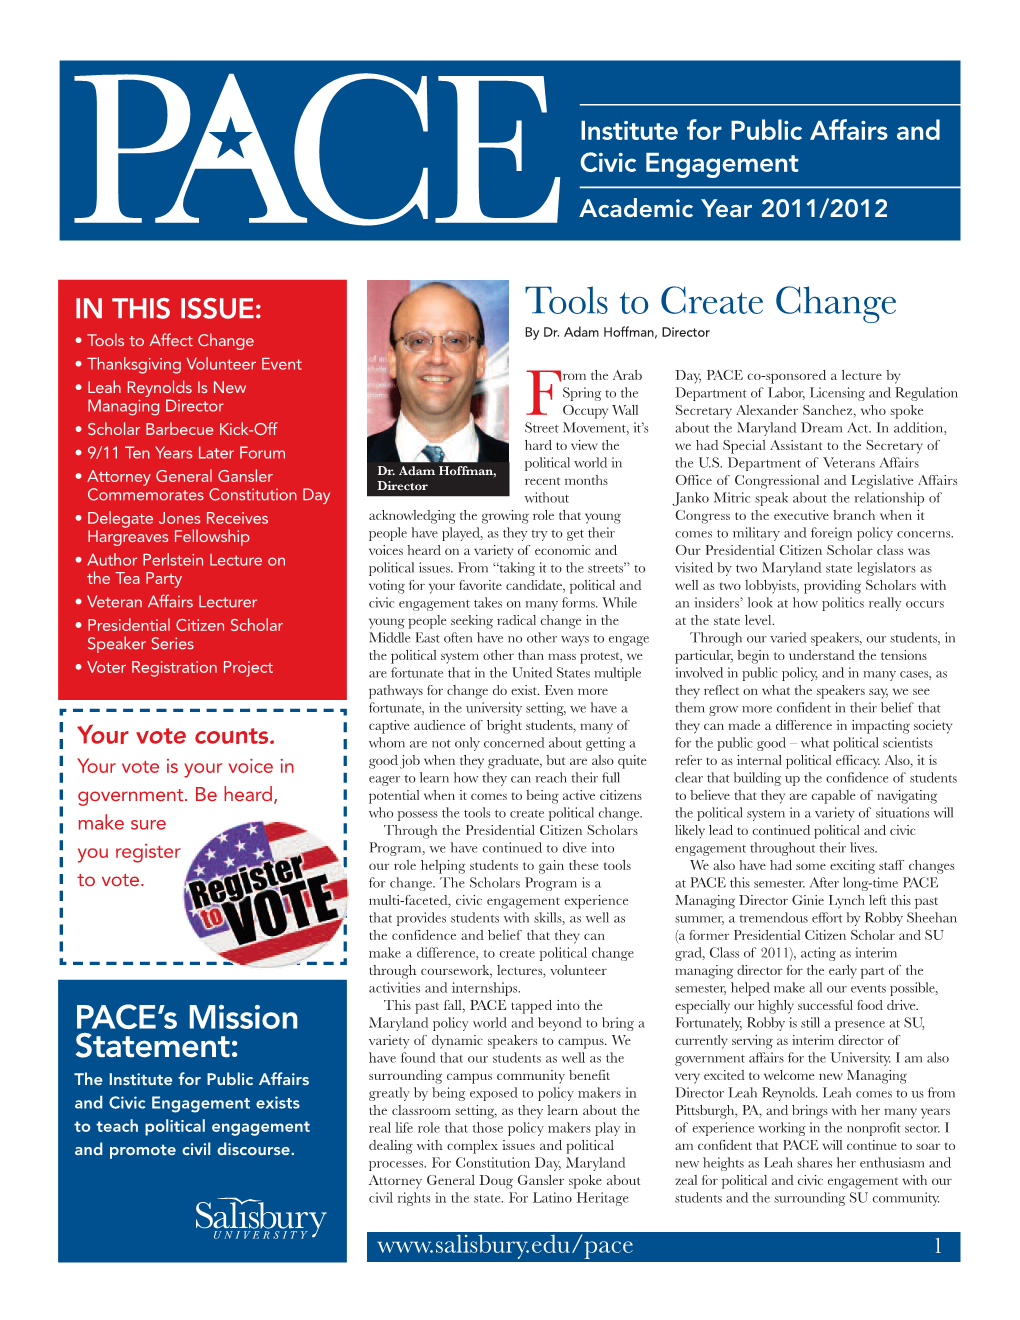 PACE Newsletter Academic Year 2011/2012